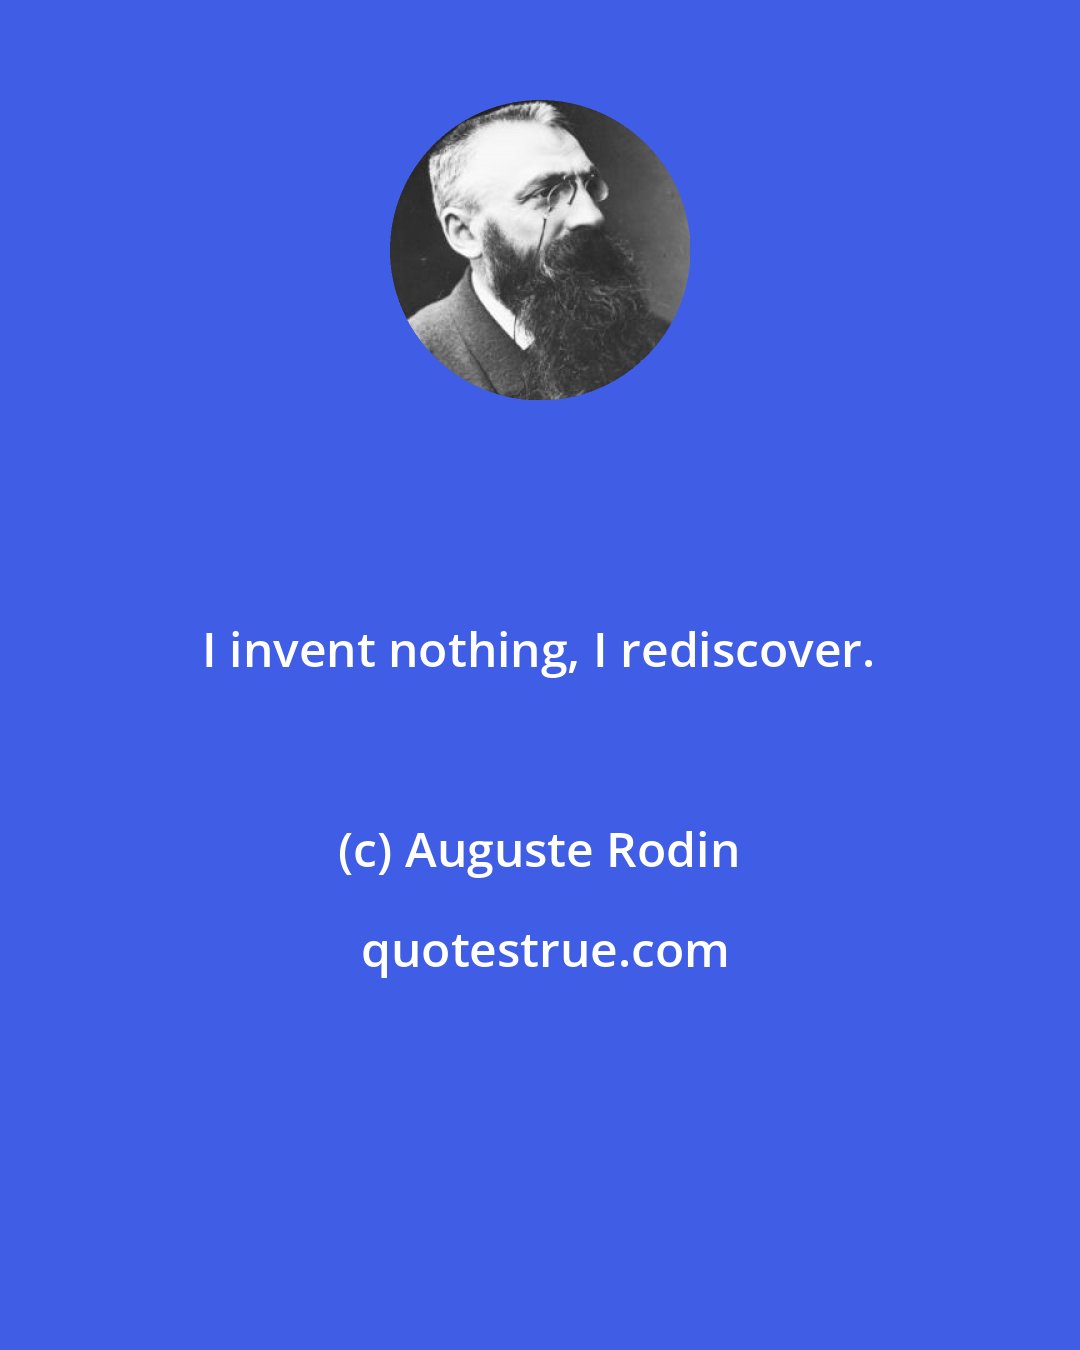 Auguste Rodin: I invent nothing, I rediscover.